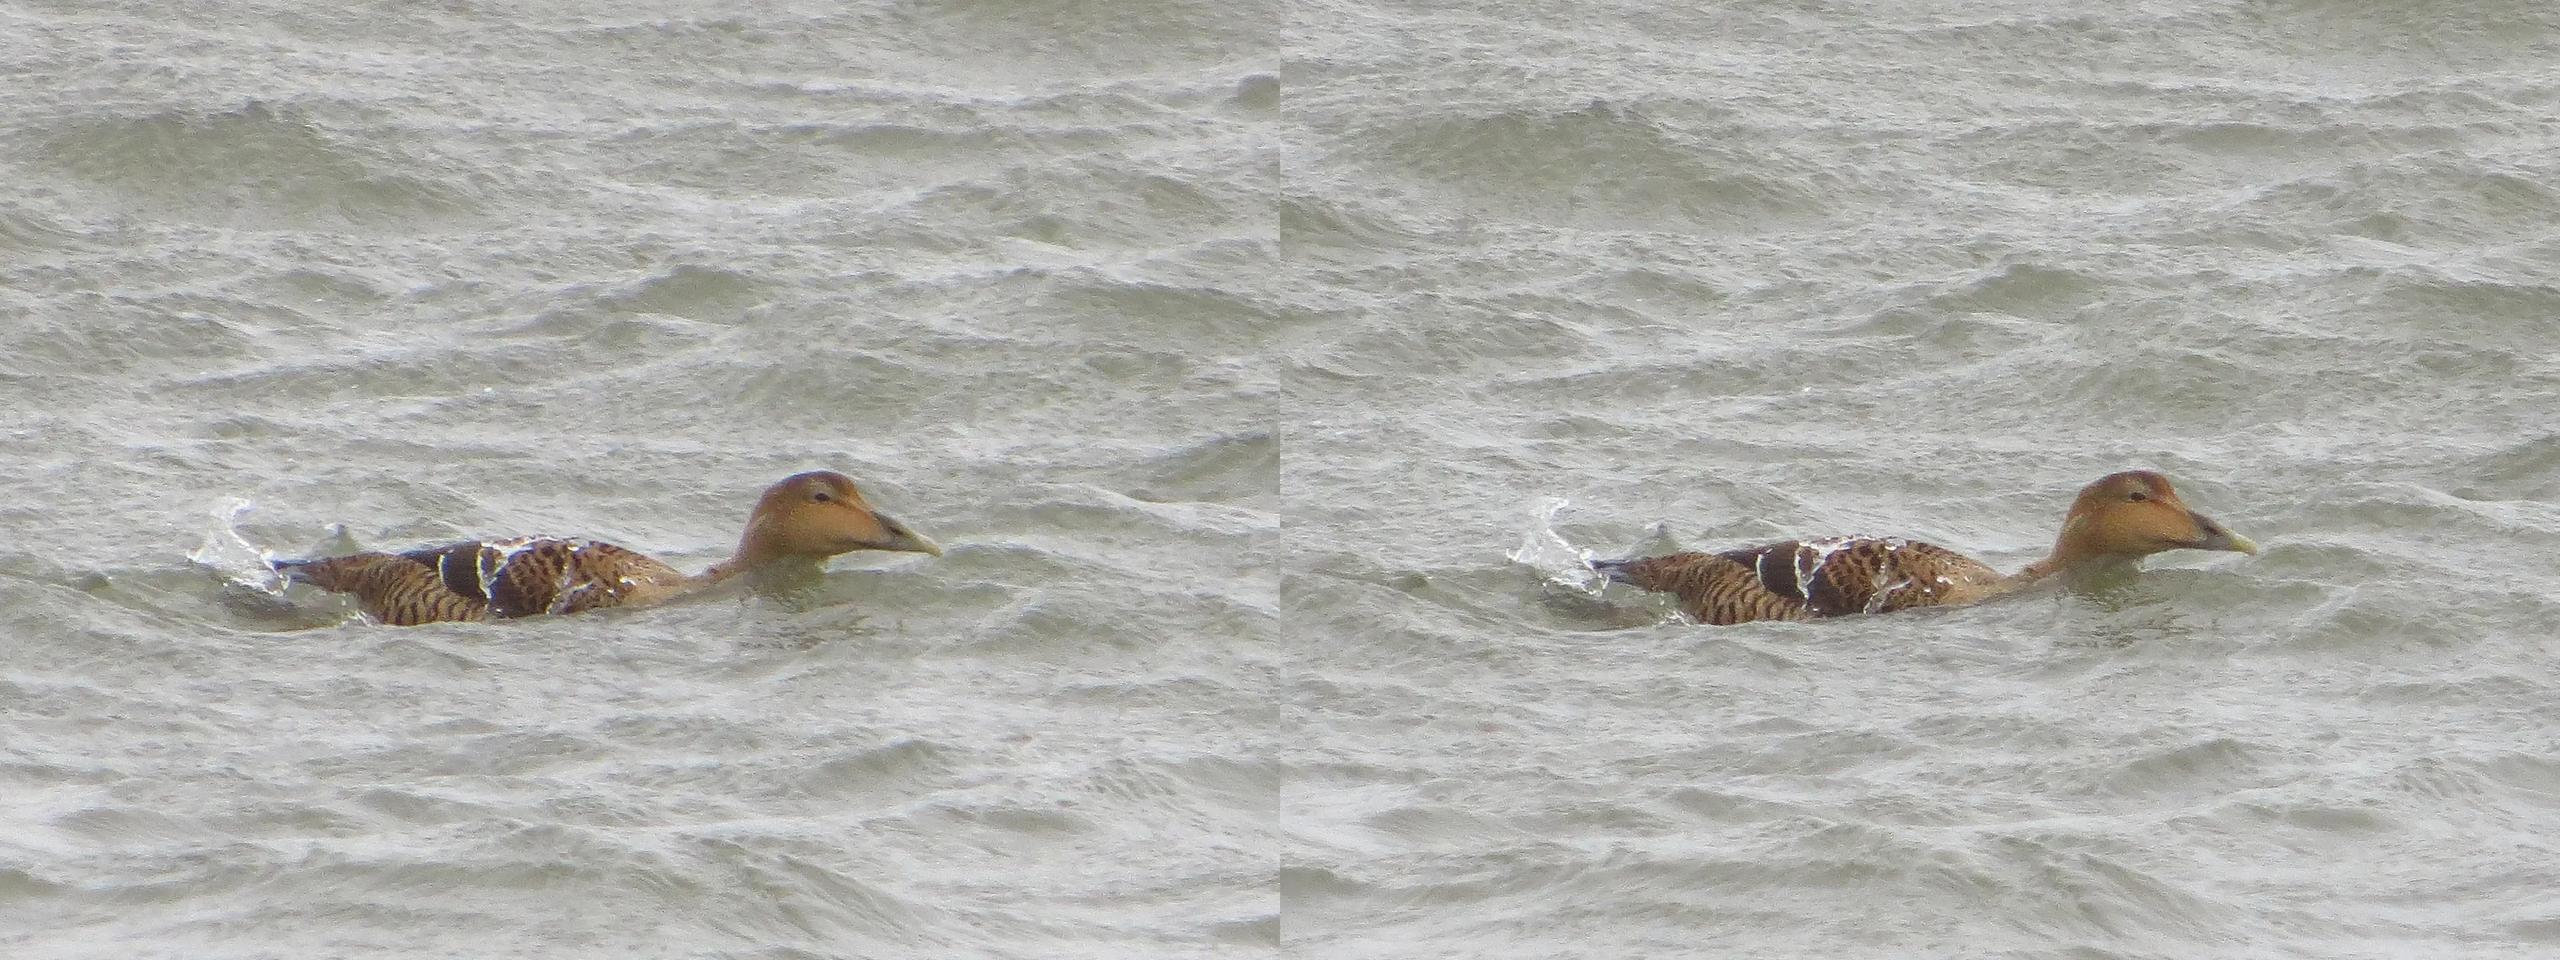 Female eider duck struggling with the waves in a rough sea